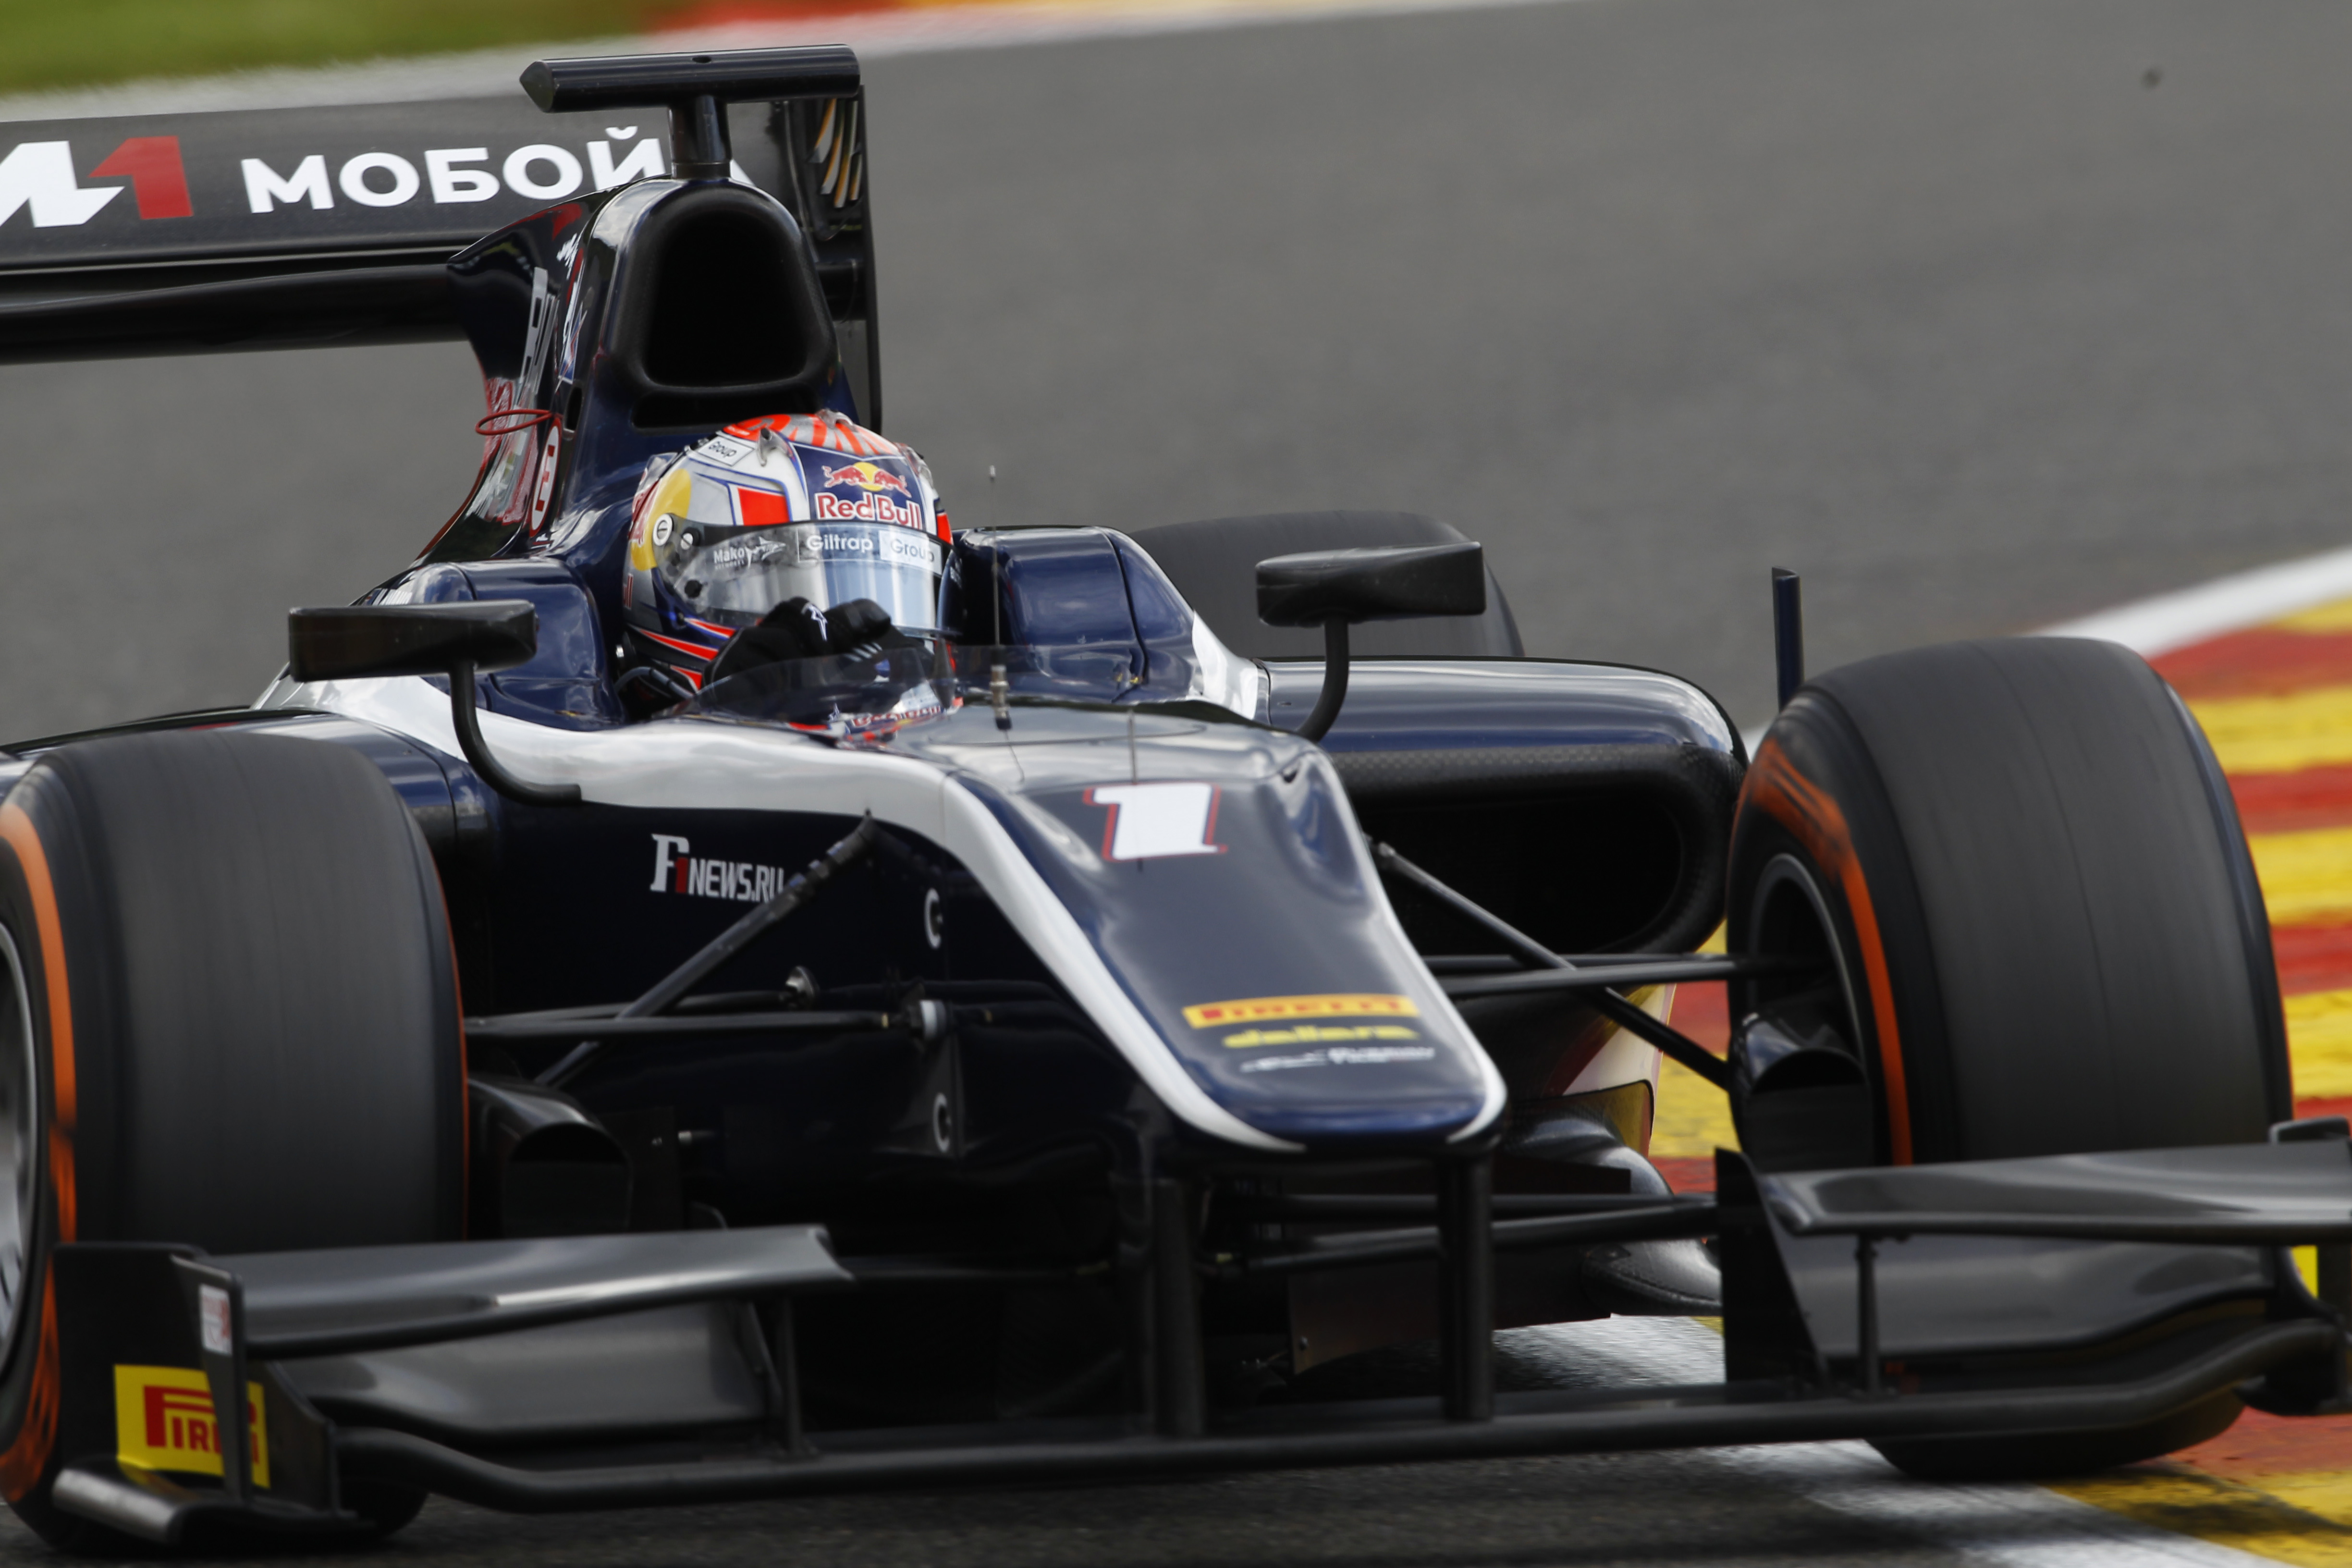 GP2: Evans qualifies third for Spa Feature race